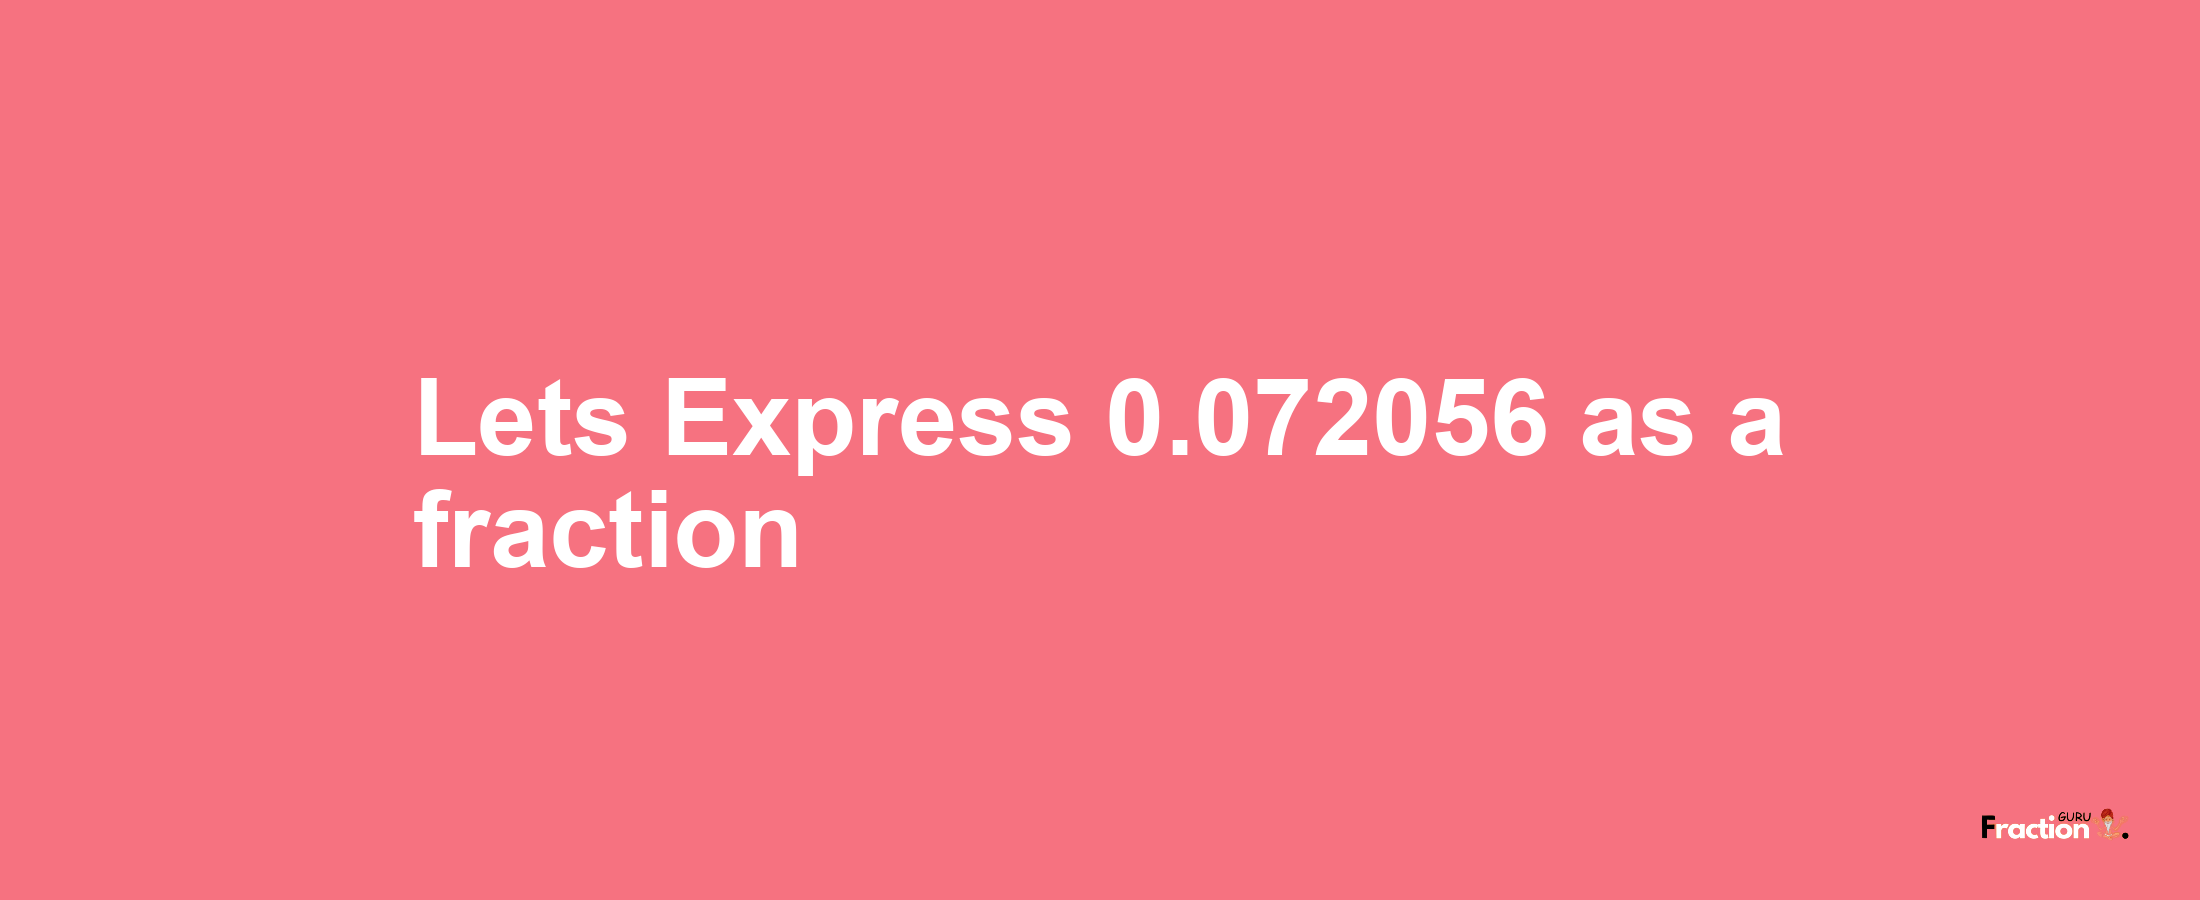 Lets Express 0.072056 as afraction